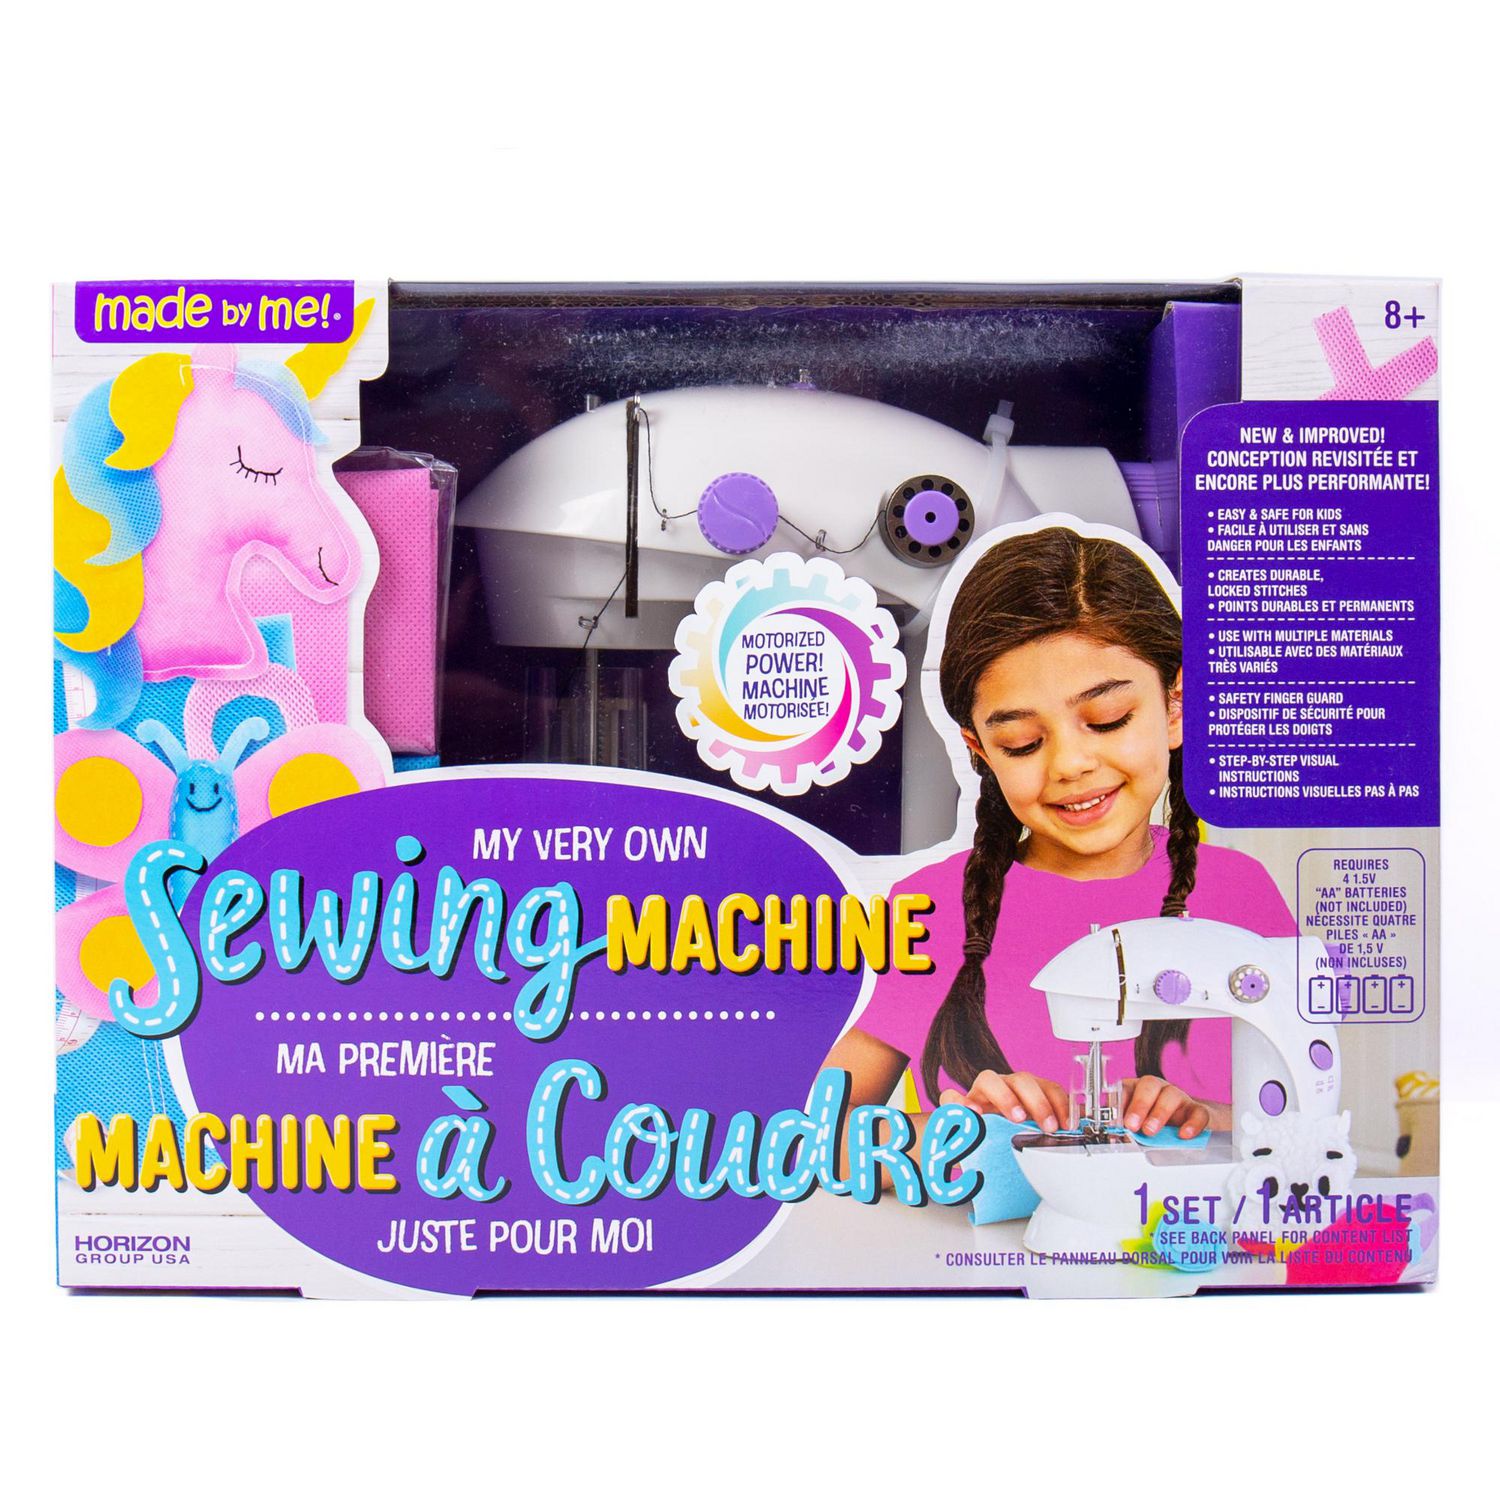 Made By Me Sewing Machine Is a Great Choice For Your Little Sewist!